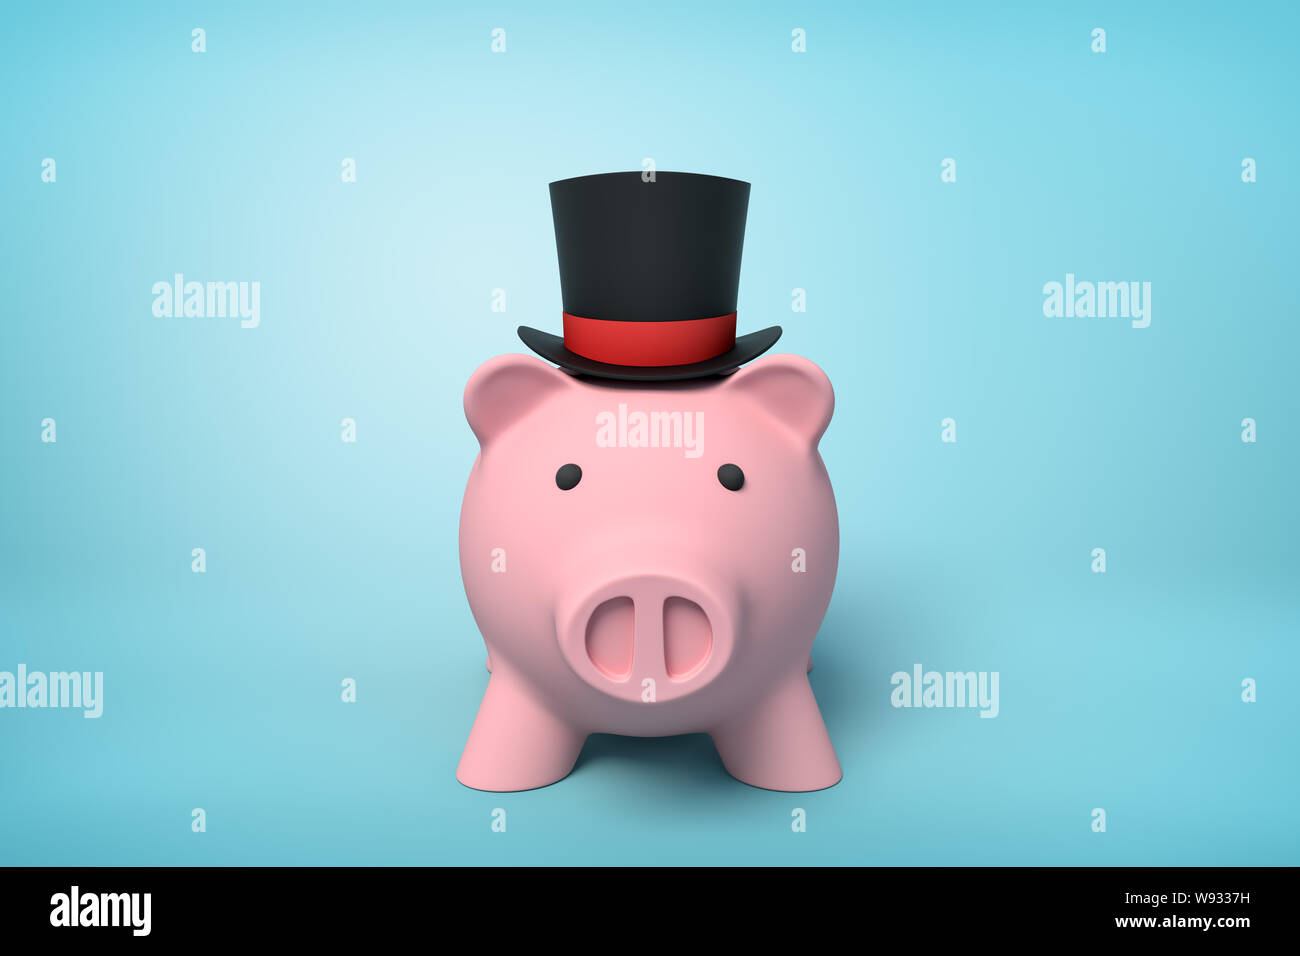 3d front close-up rendering of pink piggy bank wearing black top hat with red ribbon on light-blue background. Stock Photo